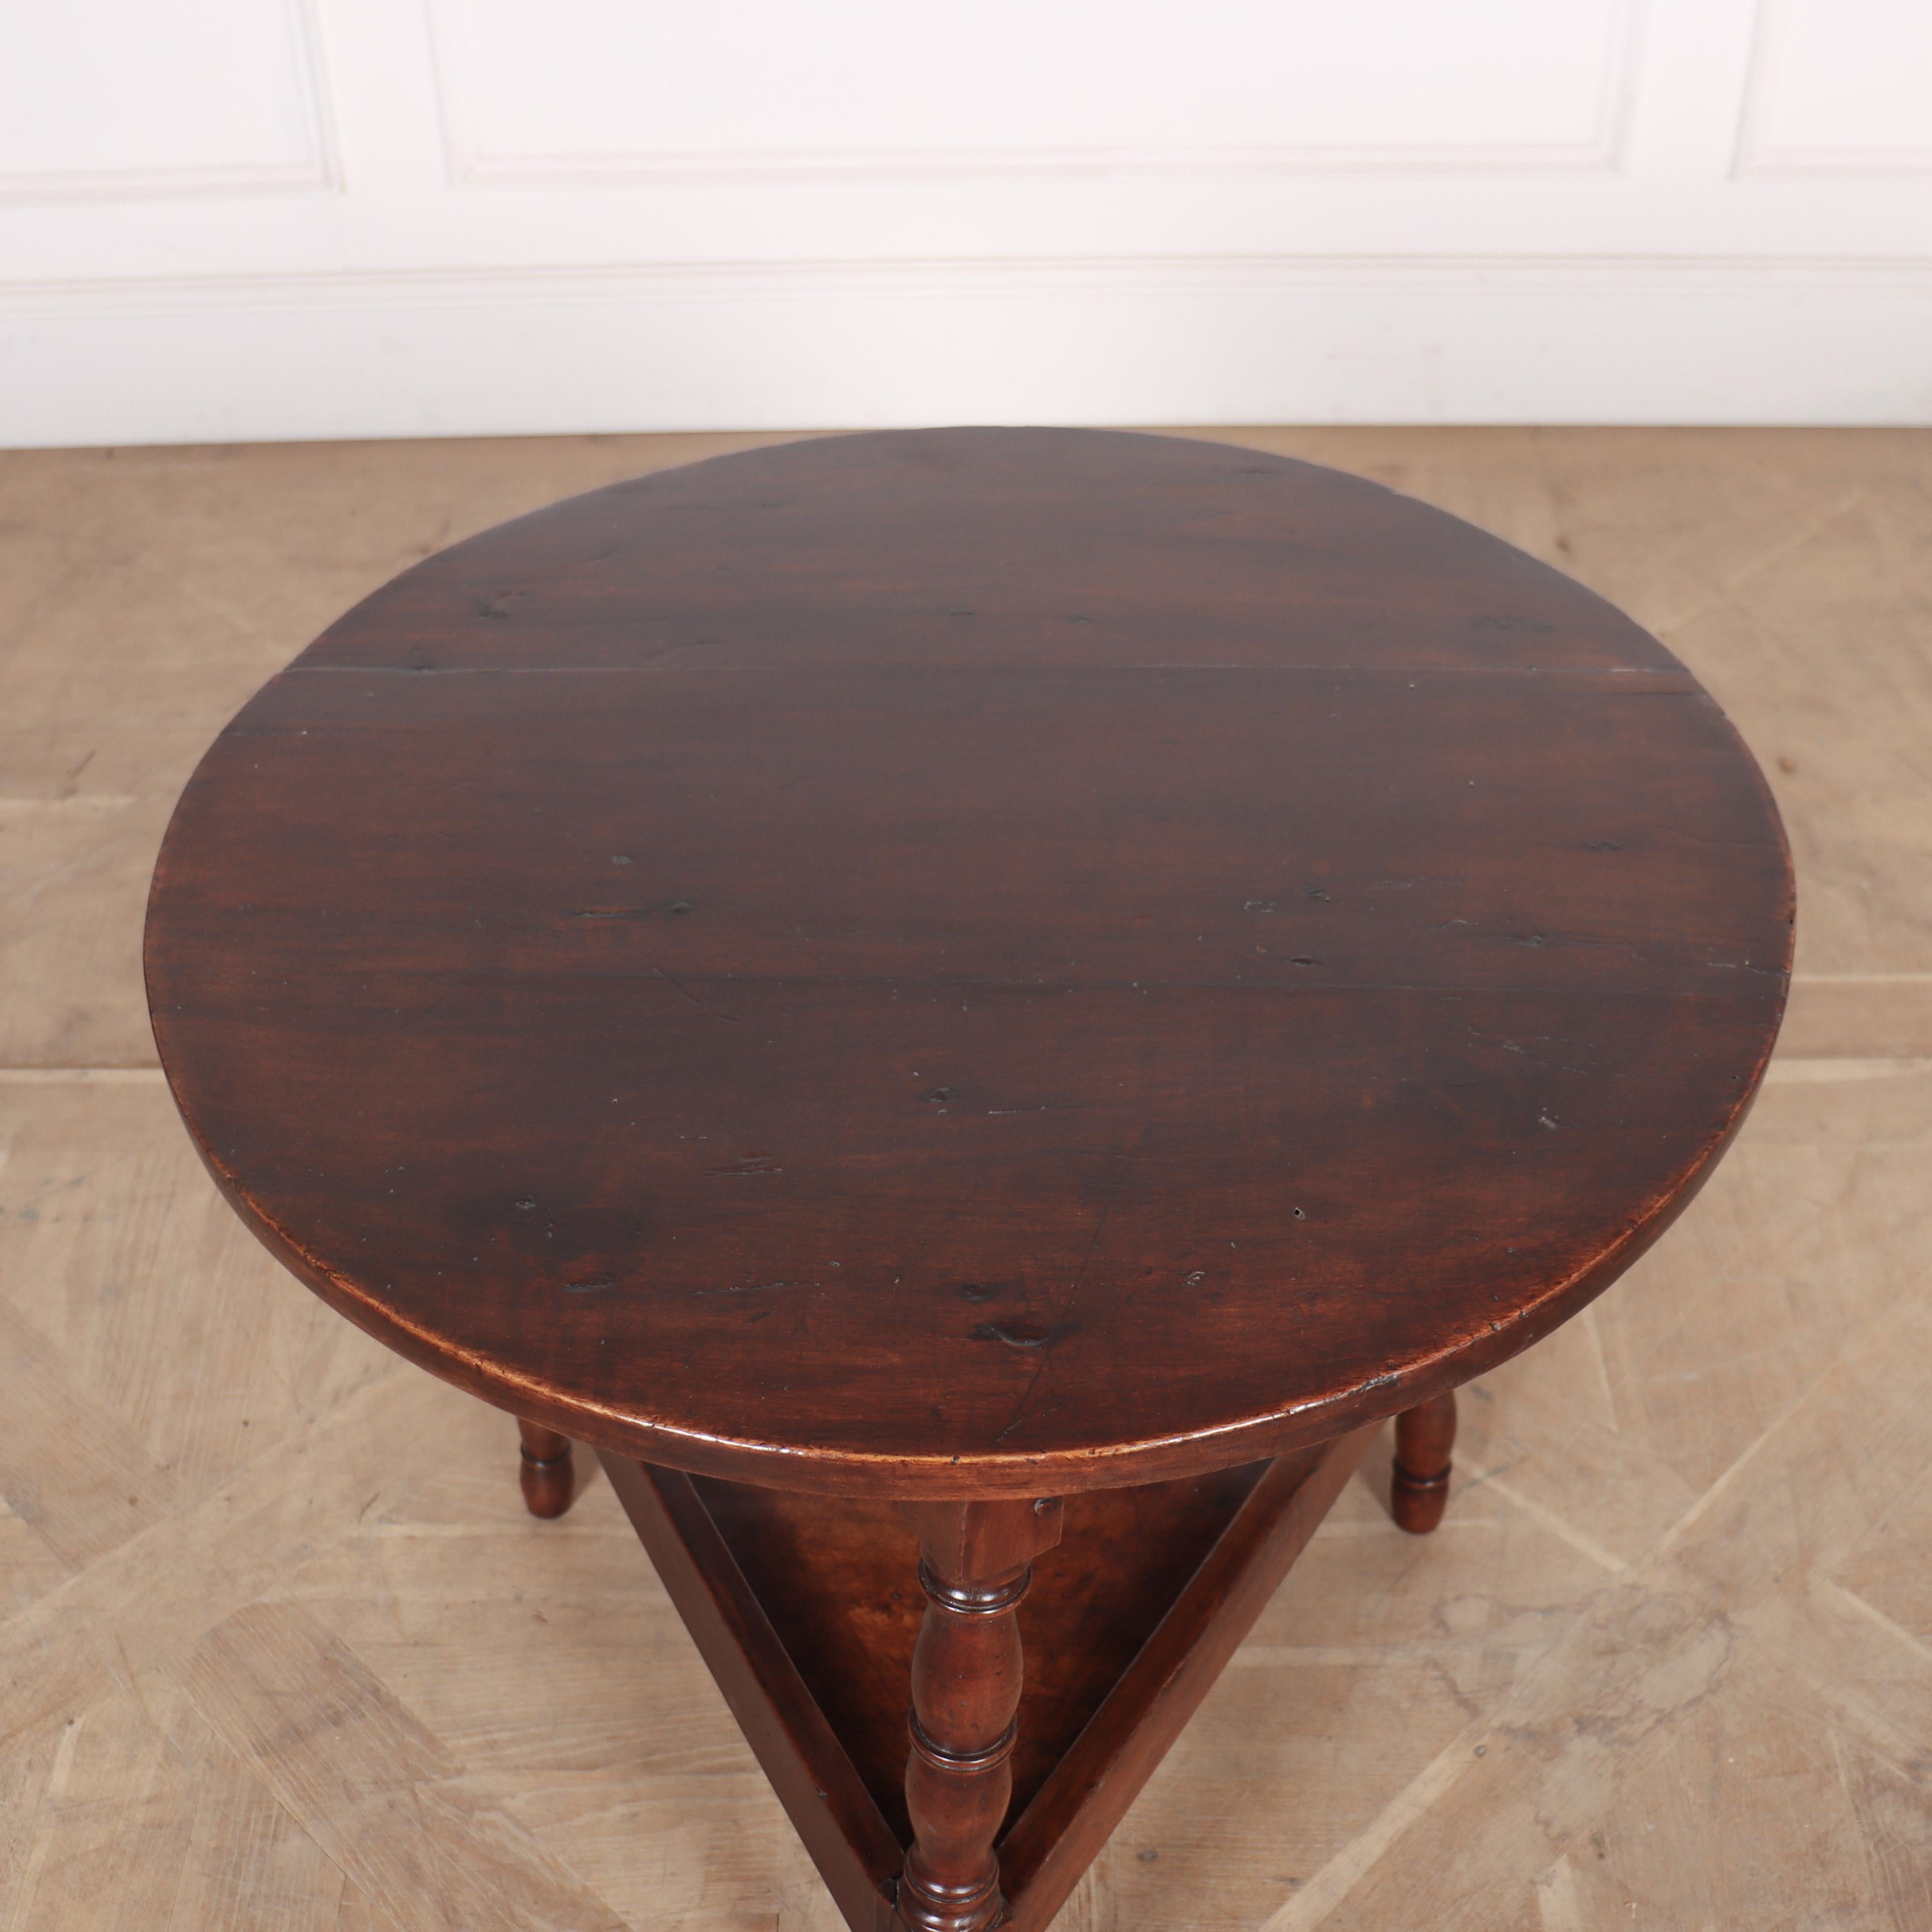 Small 19th C Welsh fruitwood cricket table. 1860.

Reference: 8024

Dimensions
25.5 inches (65 cms) High
26 inches (66 cms) Diameter